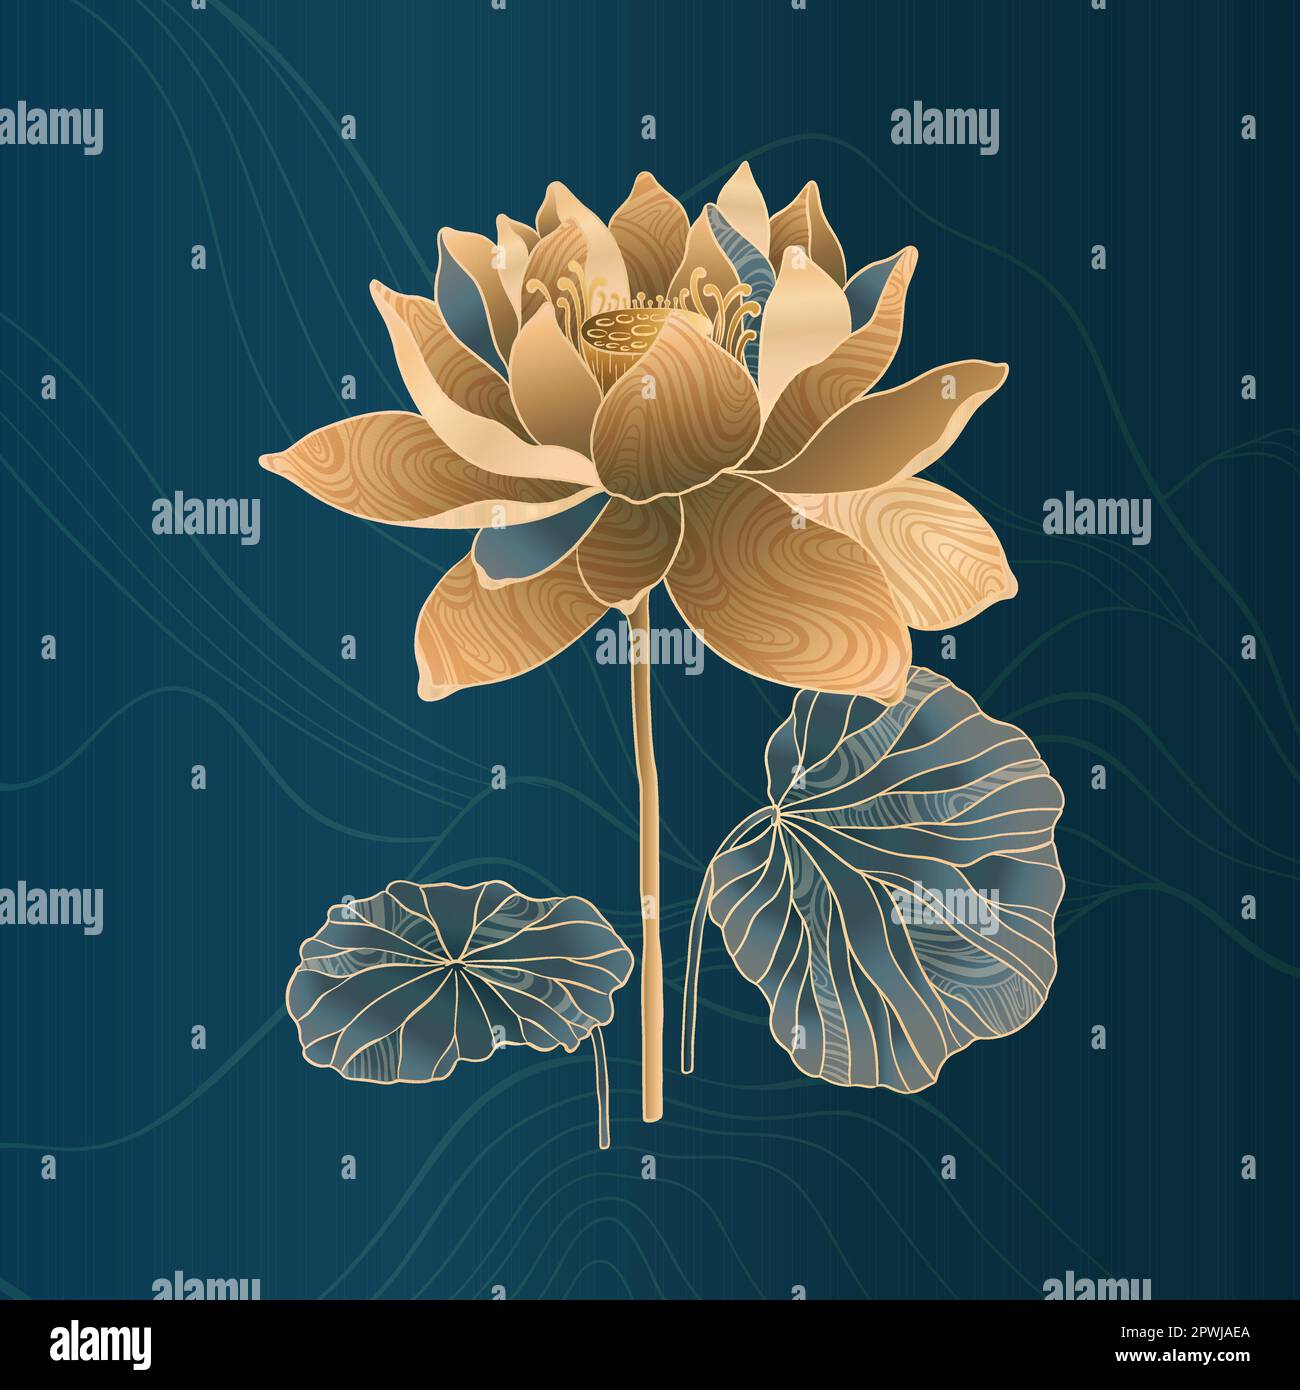 Lotus flowers for luxury and exclusive use in design. Water lilies in gold and blue colors, isolated lotus elements. Nelumbo made in Chinese Stock Vector